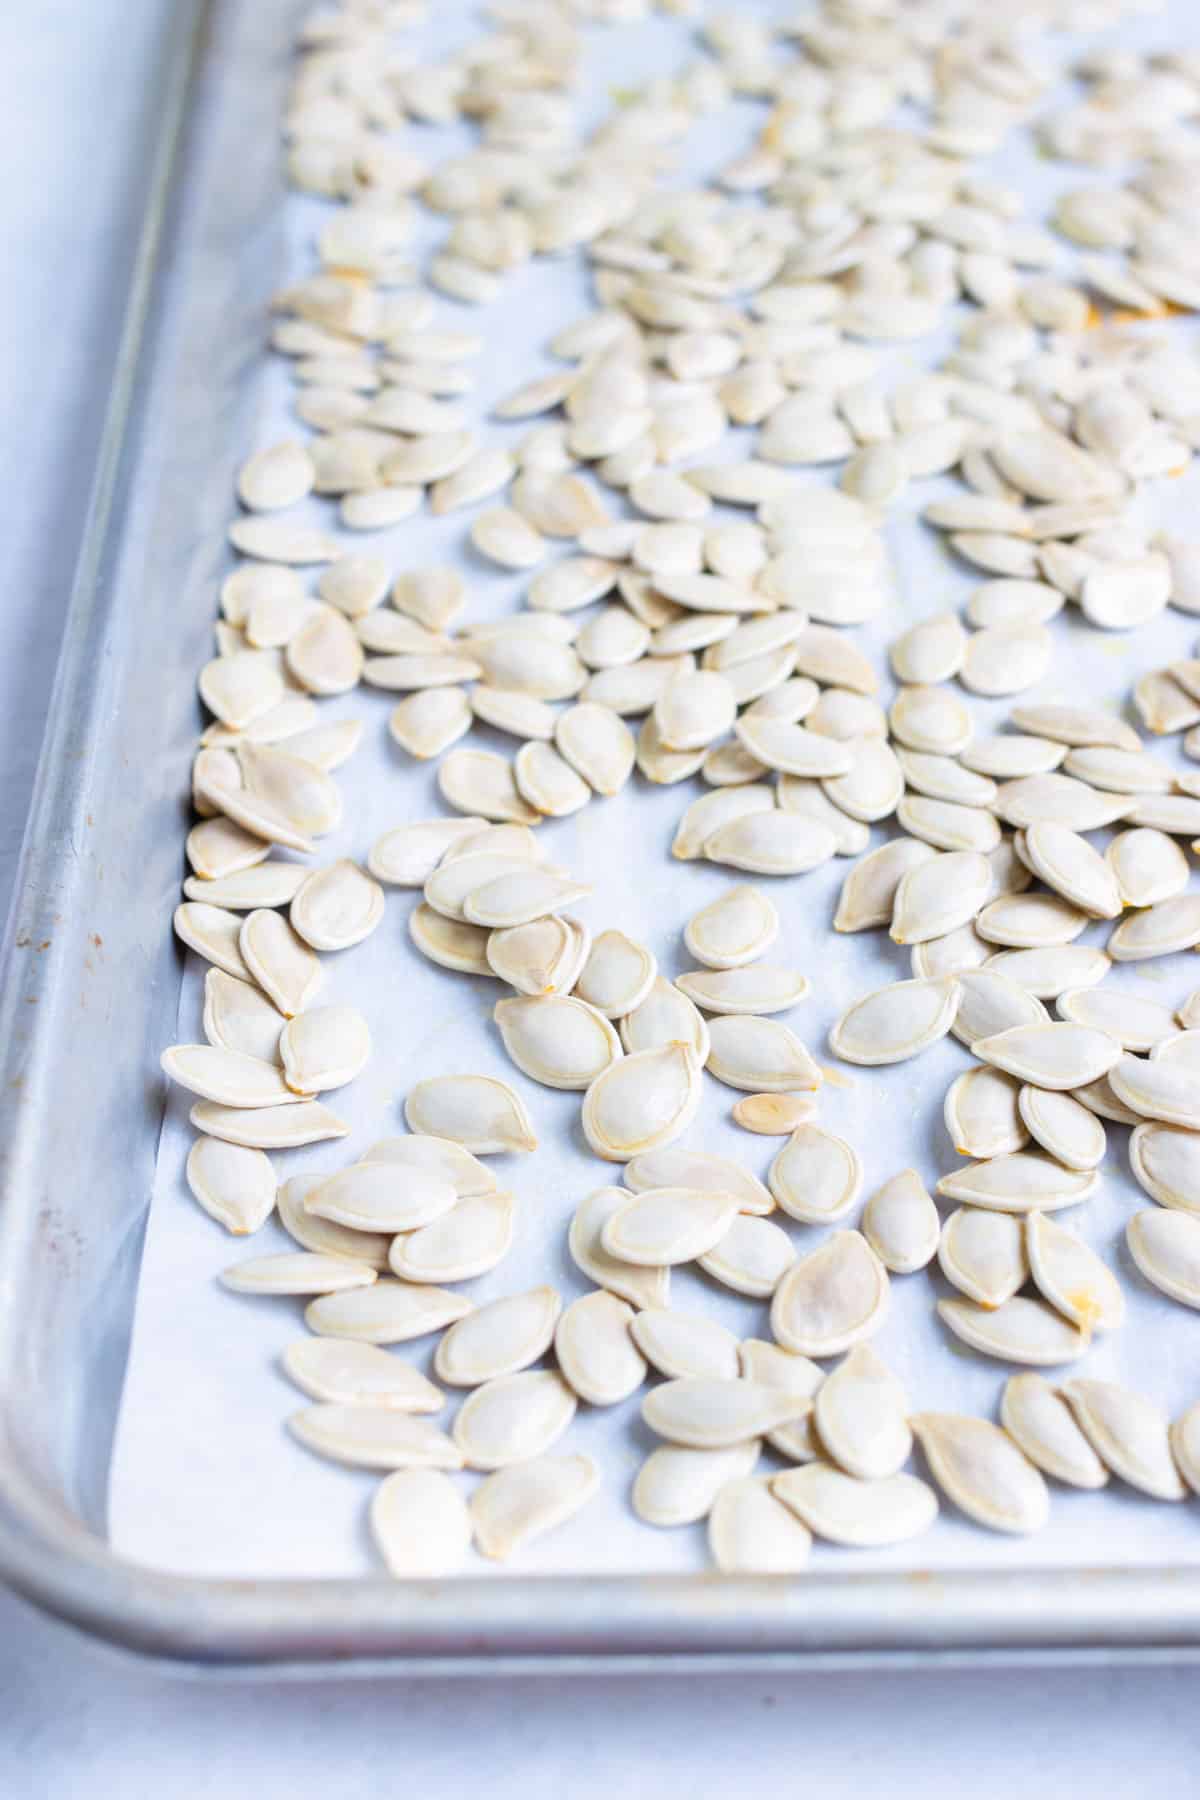 Pumpkin seeds are placed on a baking sheet before being toasted.